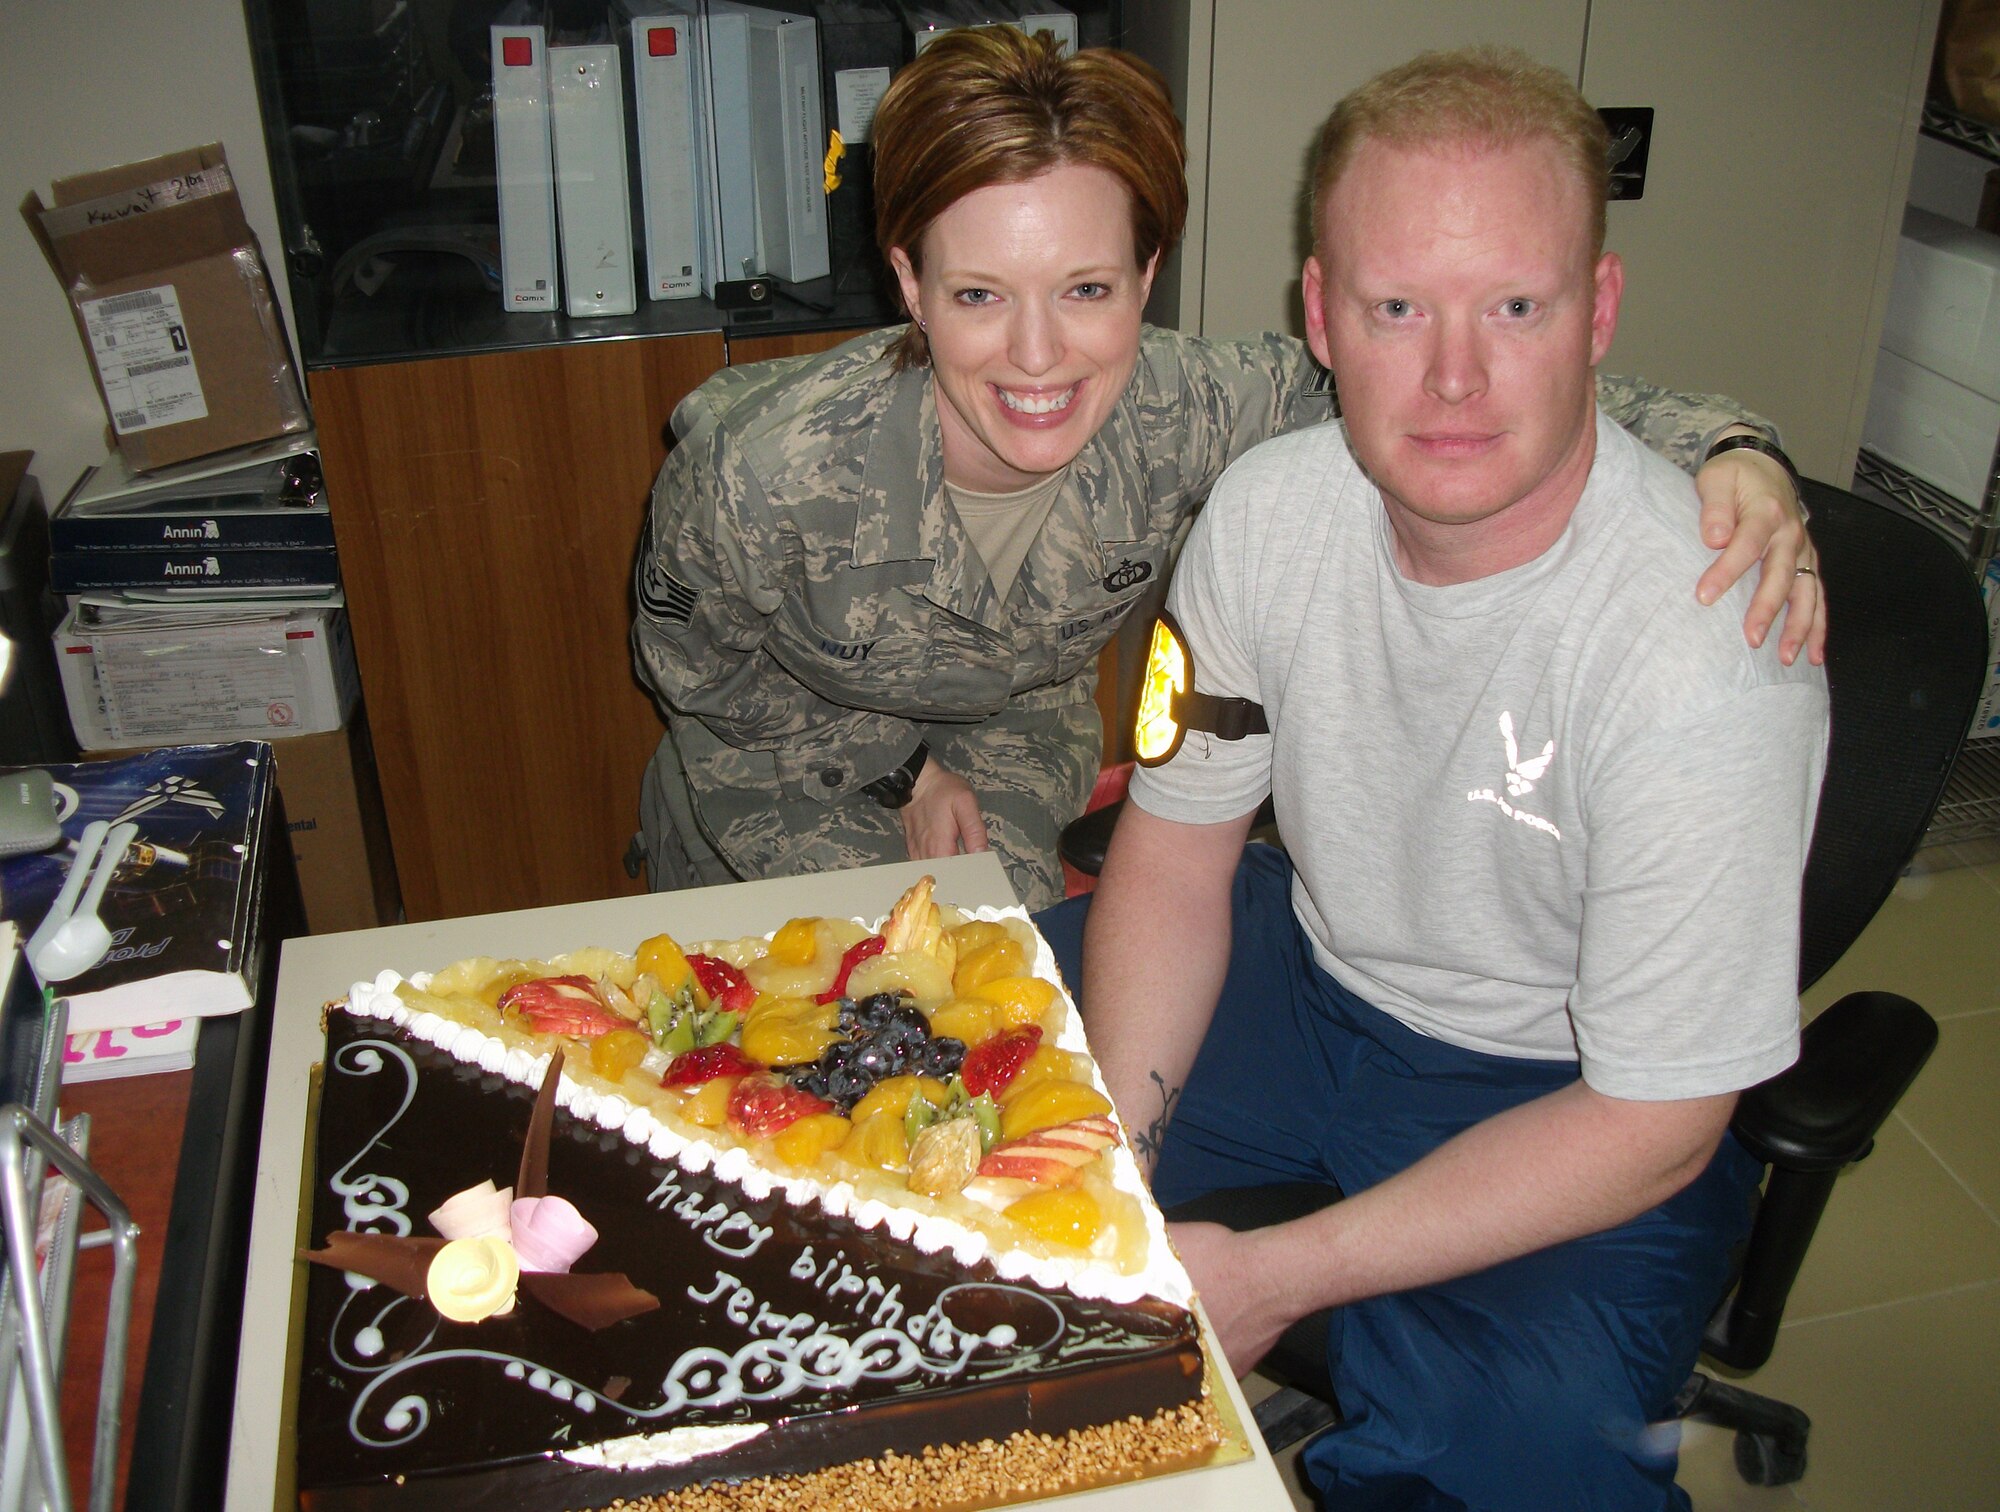 Tech. Sgt. Jennifer Nuy, 386th Expeditionary Operations Group weather flight chief, and her big brother, Staff Sgt. Jeremy Pickens, 817th Expeditionary Airlift Squadron C-17 loadmaster, celebrate their birthdays together Feb.  25, 2010 at an air base in Southwest Asia. The siblings, both Union Town, Ohio, natives, were together on their birthdays for the first time in 16 years. Sergeant Nuy is assigned to the 43rd Operations Support Squadron at Pope Air Force Base, N.C. and Sergeant Pickens is assigned to the 21st Airlift Squadron at Travis AFB, Calif. (U.S. Air Force photo/Released) 